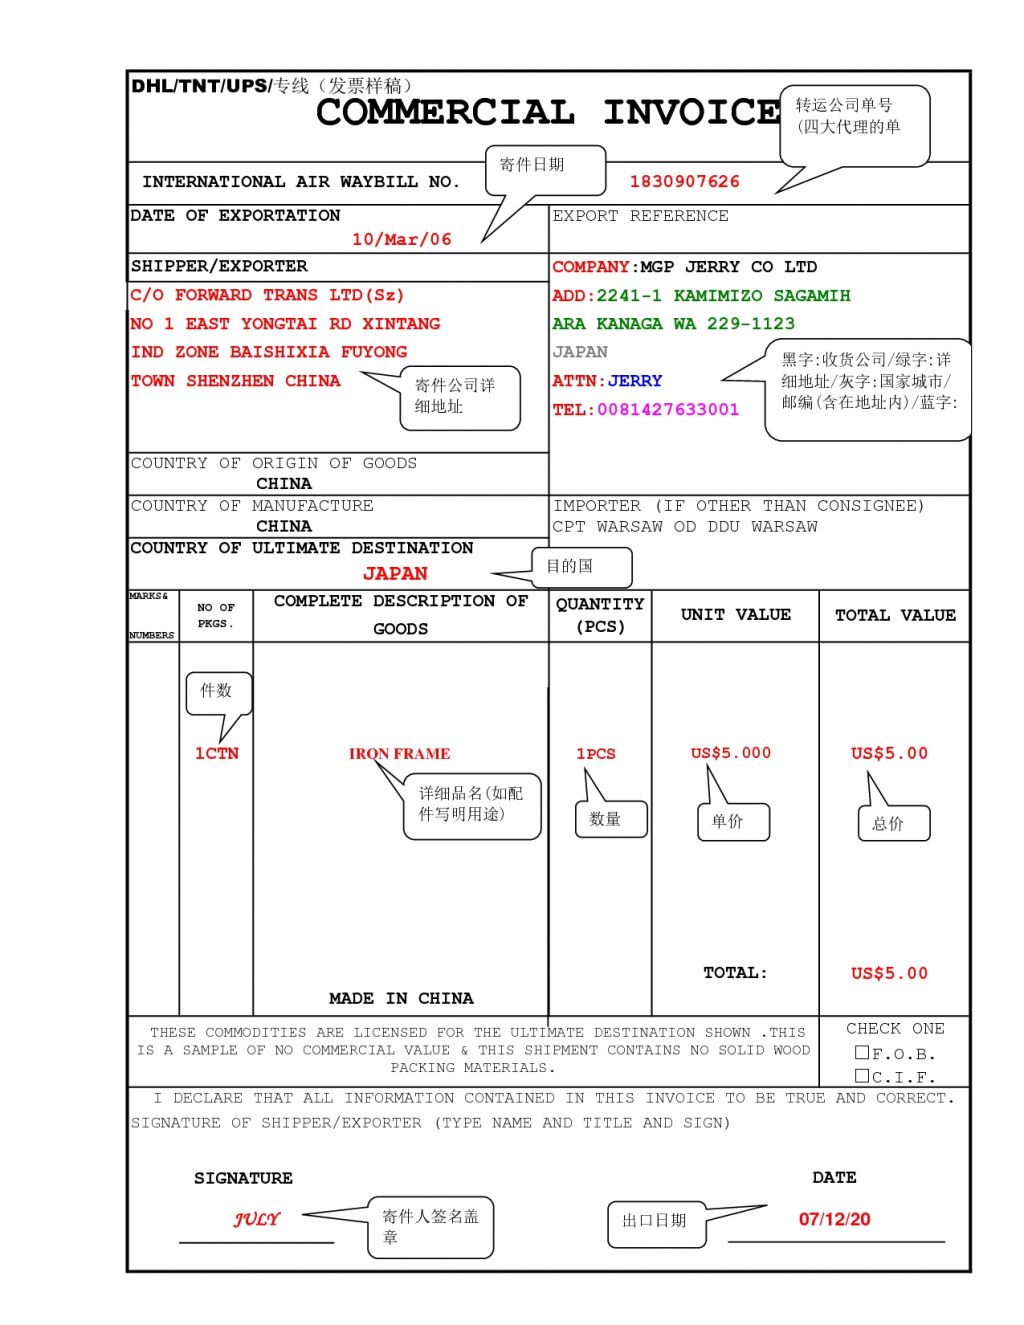 Dhl Commercial Invoice Form Template DHL Invoice Invoic Commercial 